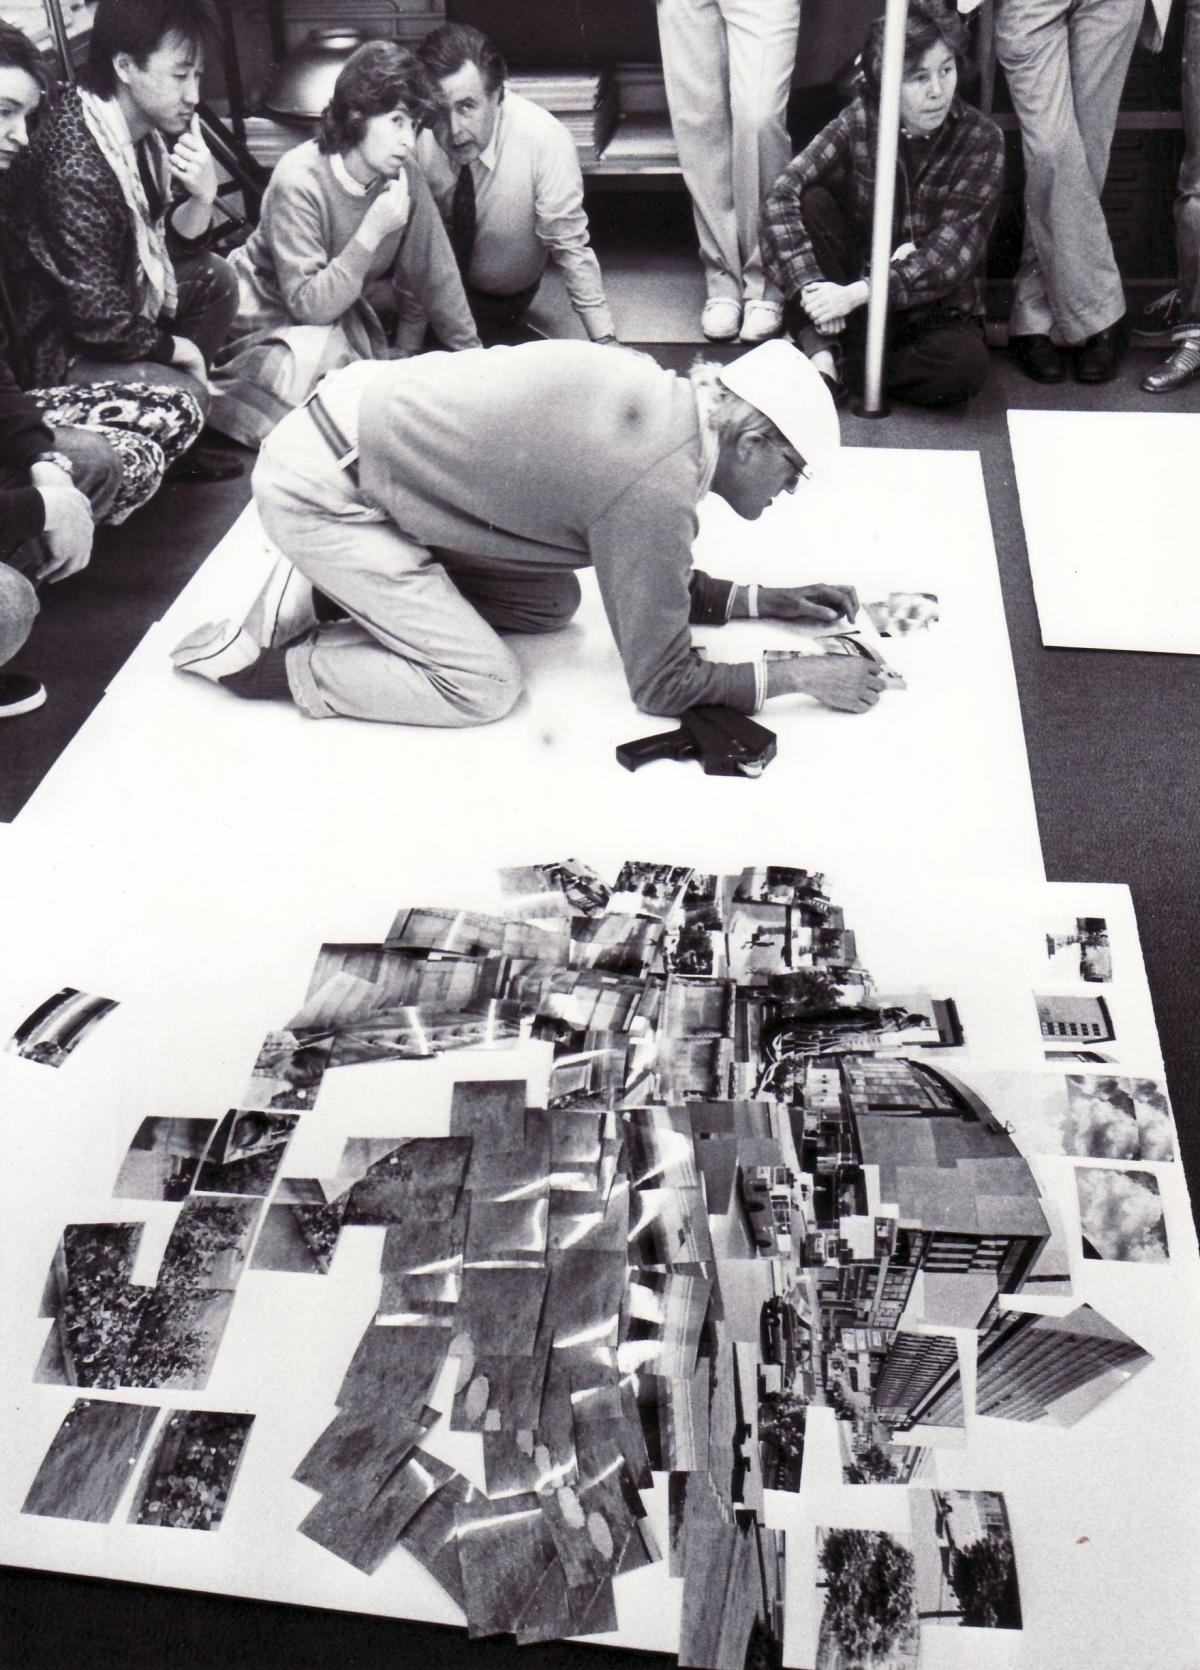 The artist at work in 1985